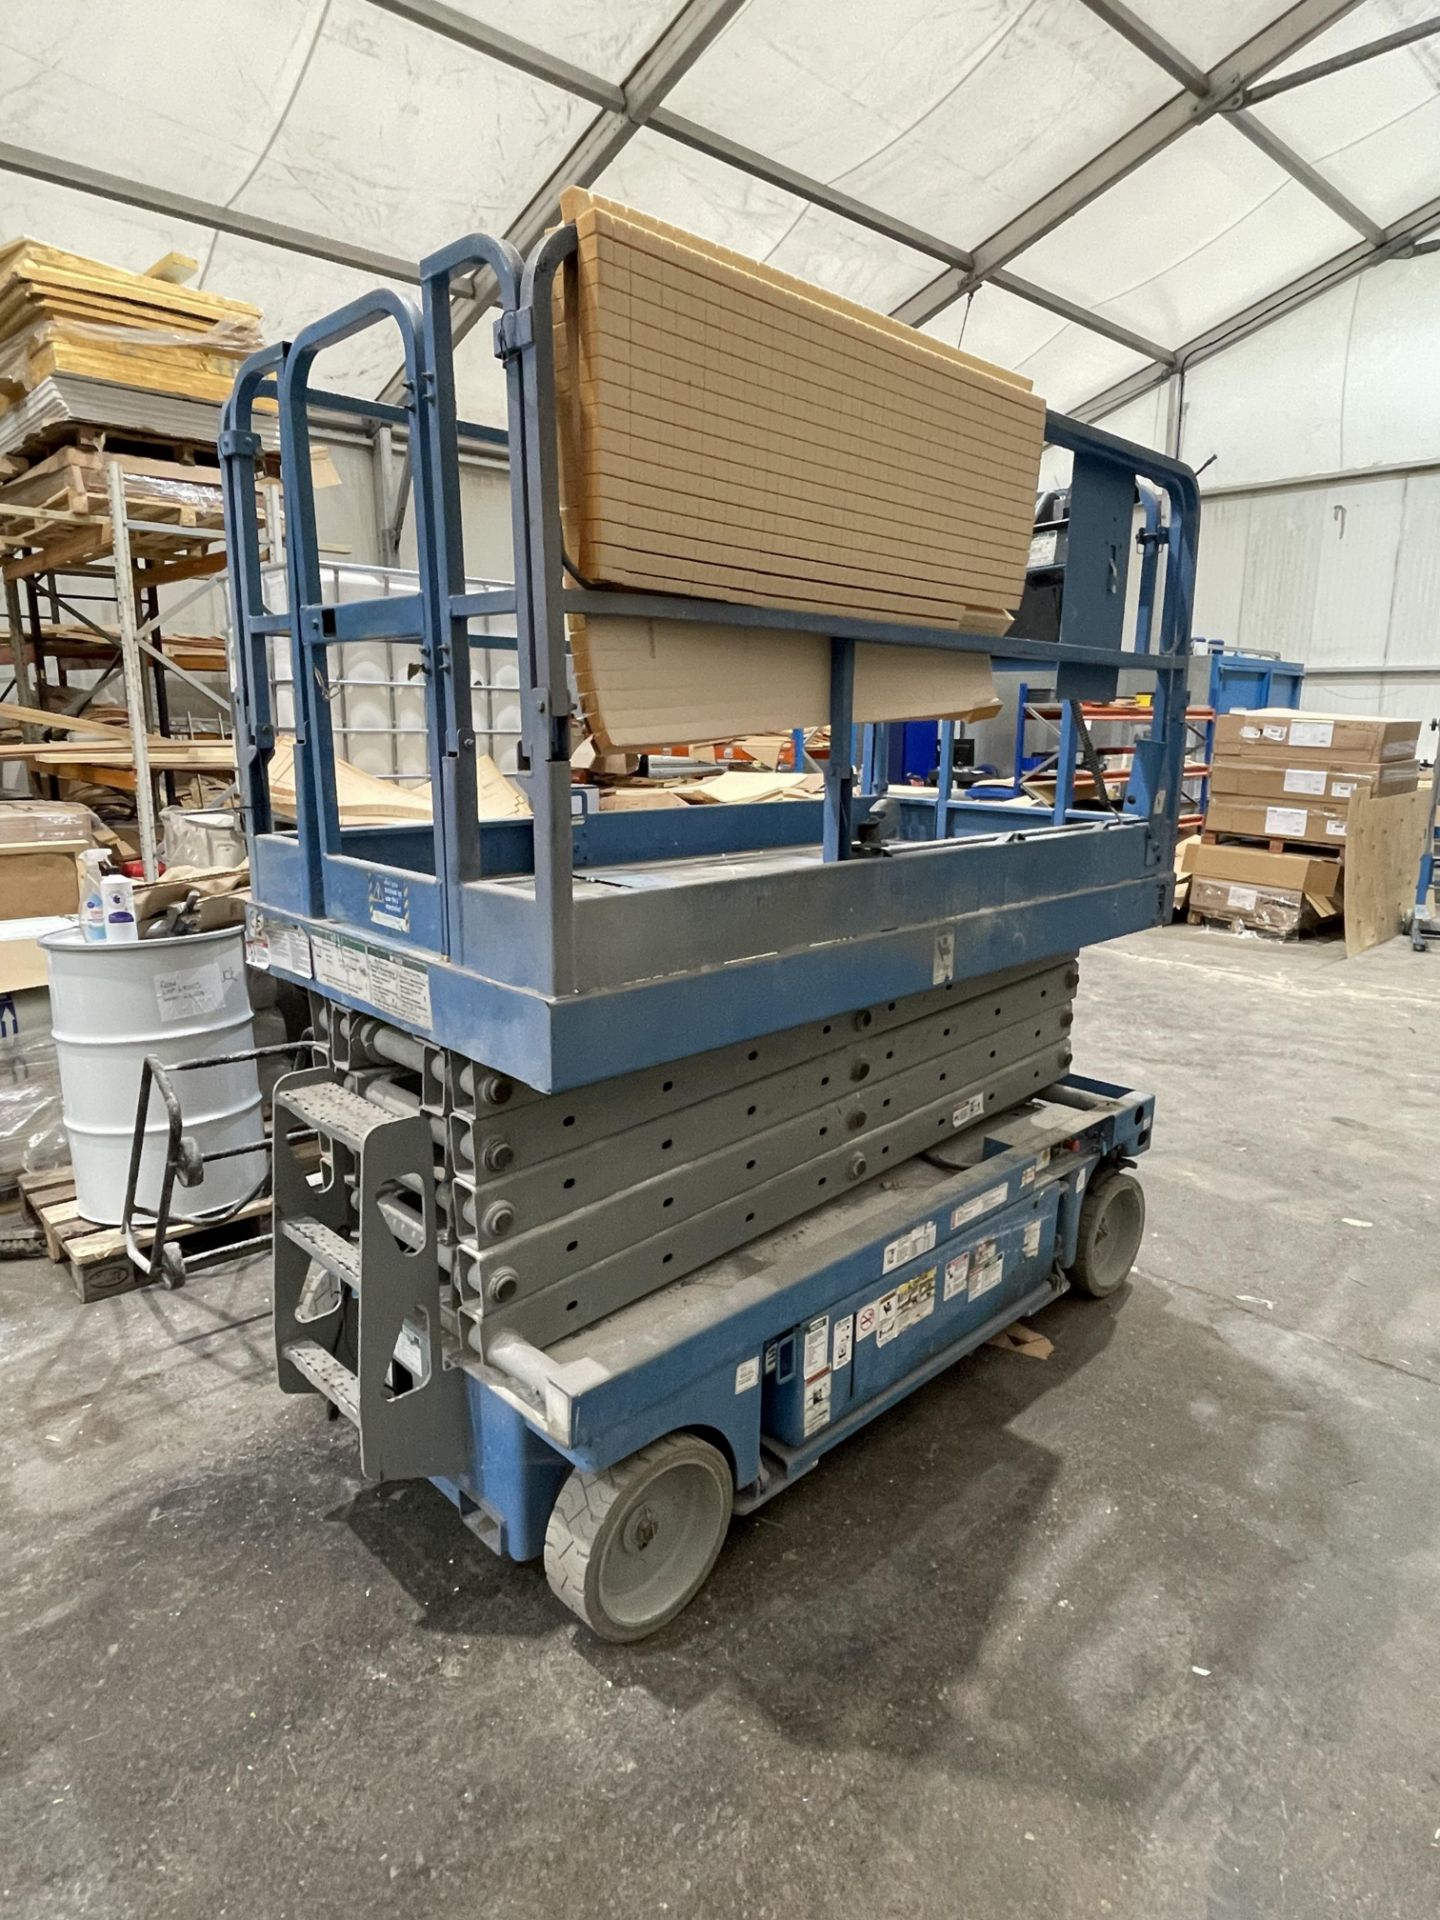 Genie GS-3246 Electric Scissor Lift, 11.75m Working Height, Run Hours: 699, S/No. GS46-48405 - Image 7 of 8